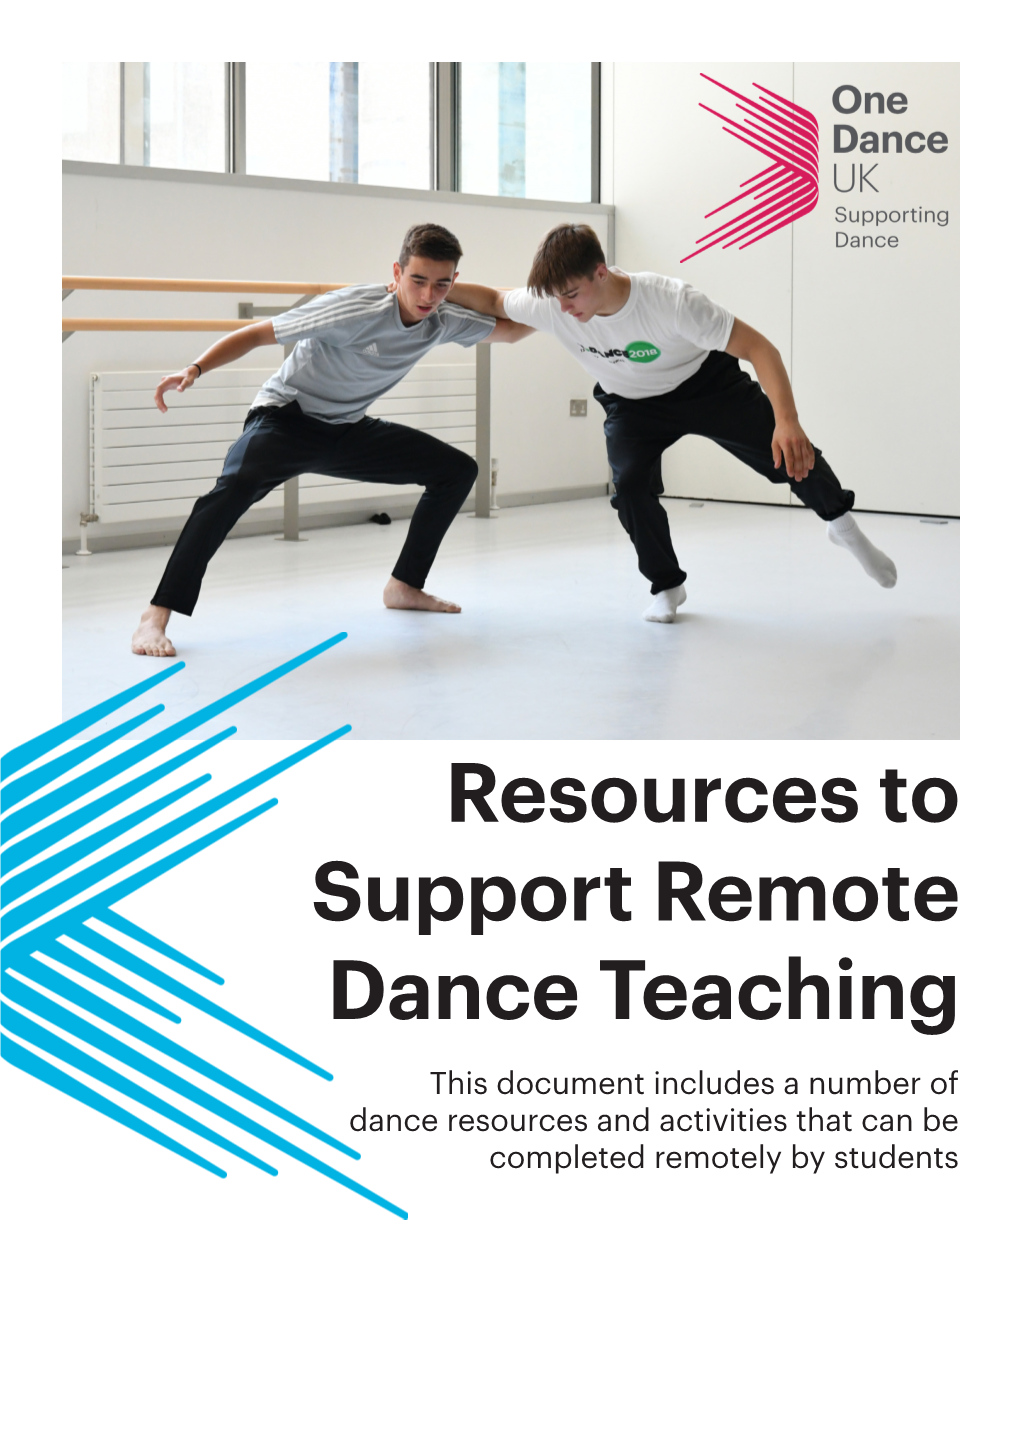 Resources to Support Remote Dance Teaching